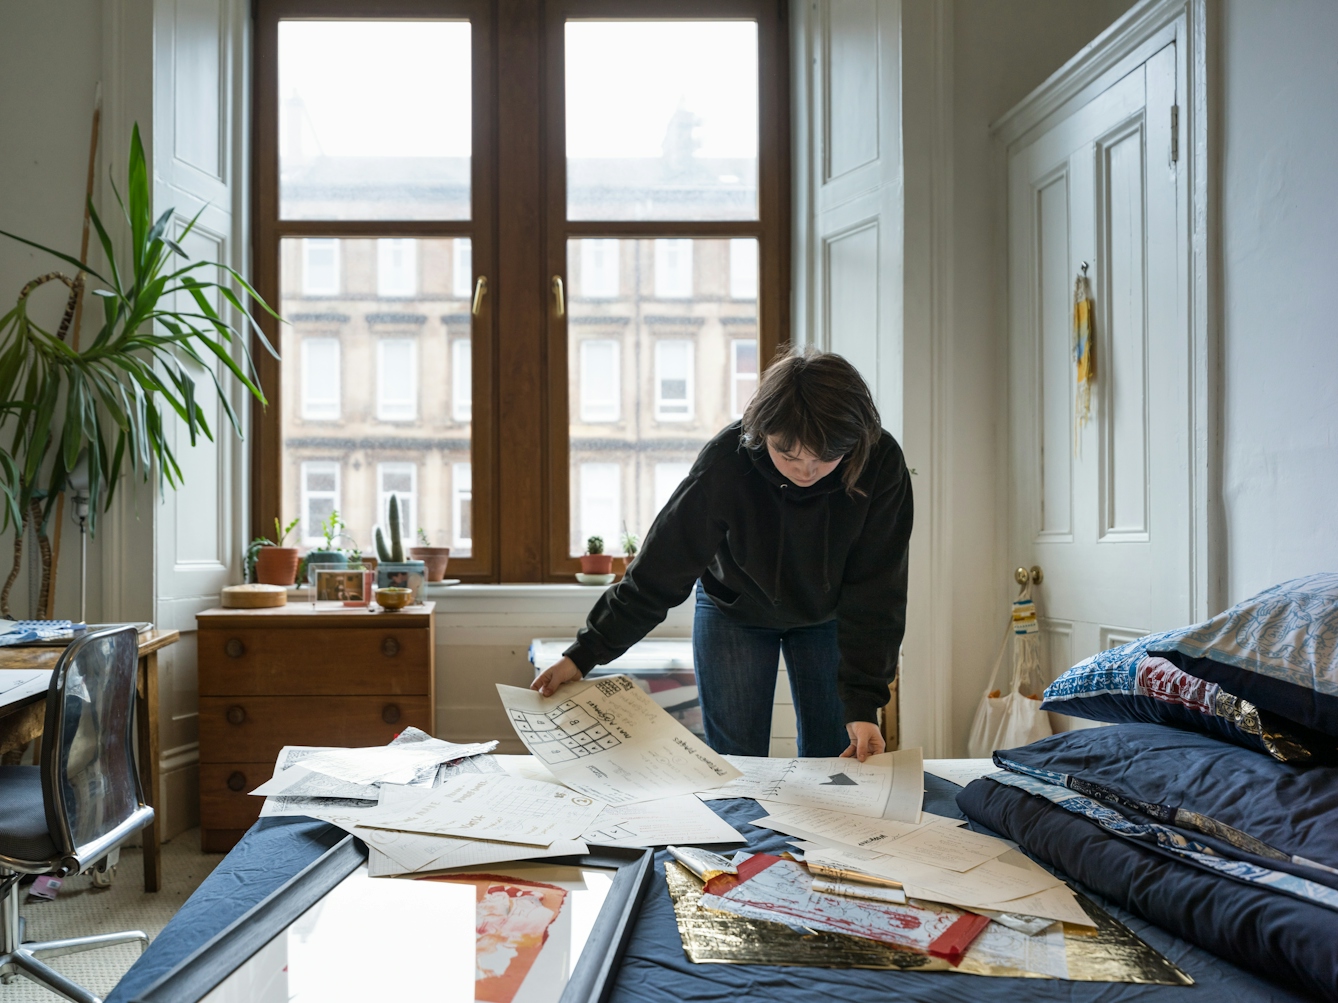 Photograph of a young woman bending over her bed holding sheets of paper in her hands. The bed is covered in more sheets of paper containing drawings and sketches. Behind her are large windows, a chest of drawers, a pot plant and the corner of a desk.